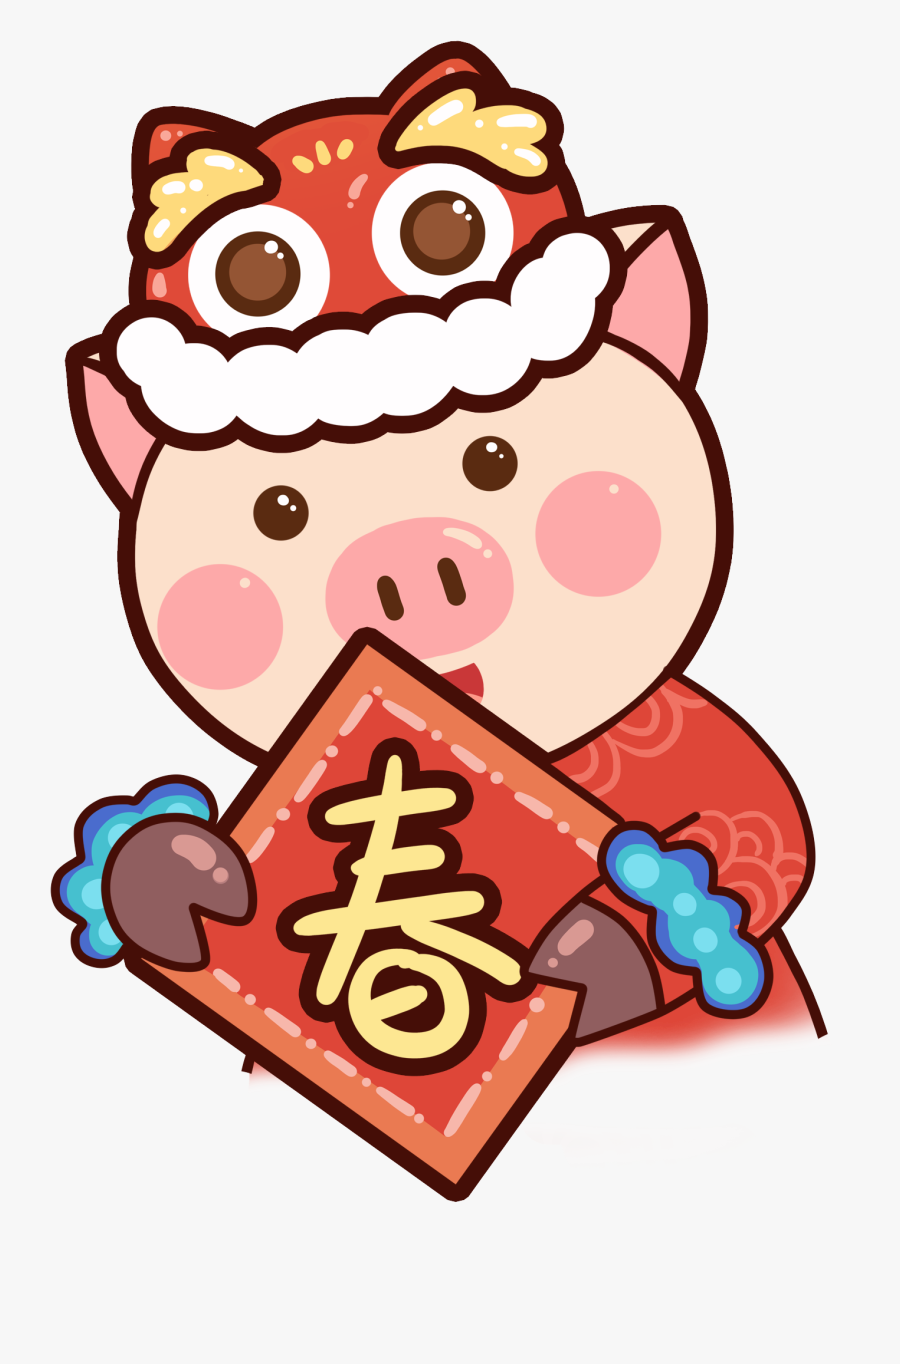 Transparent Chinese New Year 2017 Clipart - Japanese Festival .png, Transparent Clipart